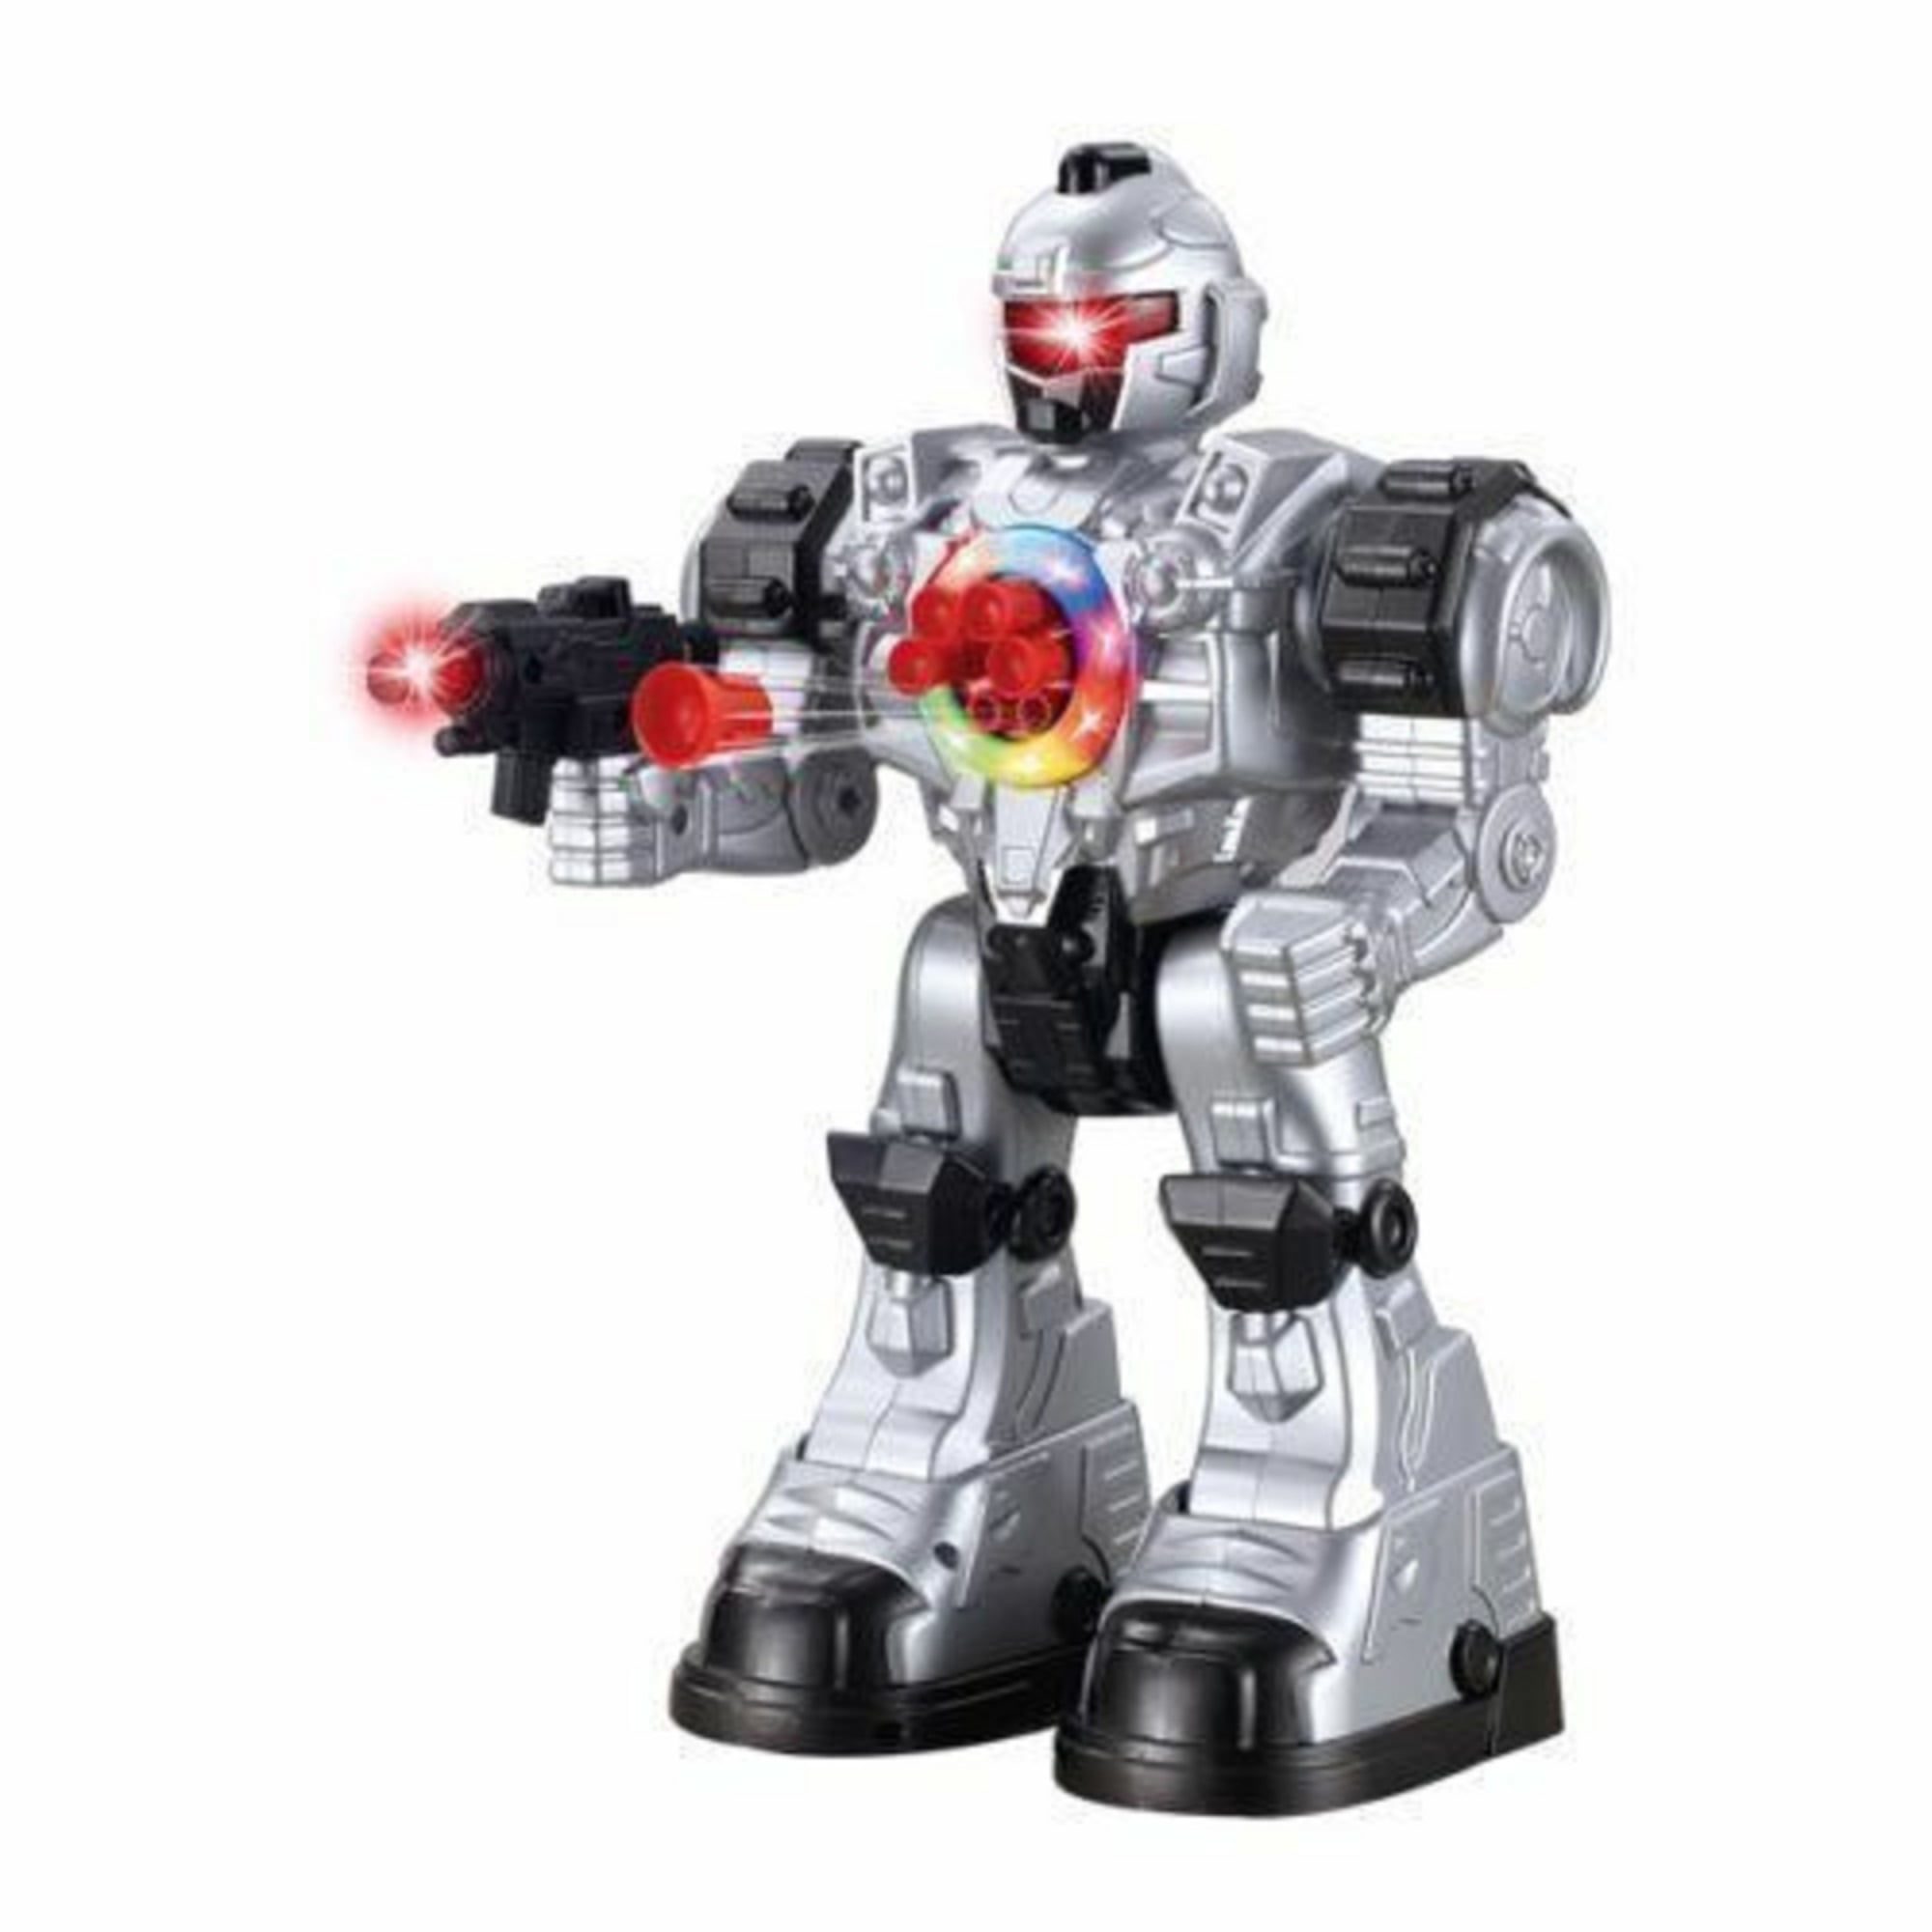 Remote Control Toy Robot Red Robo Attack Walks & Talks Shoots Missiles 